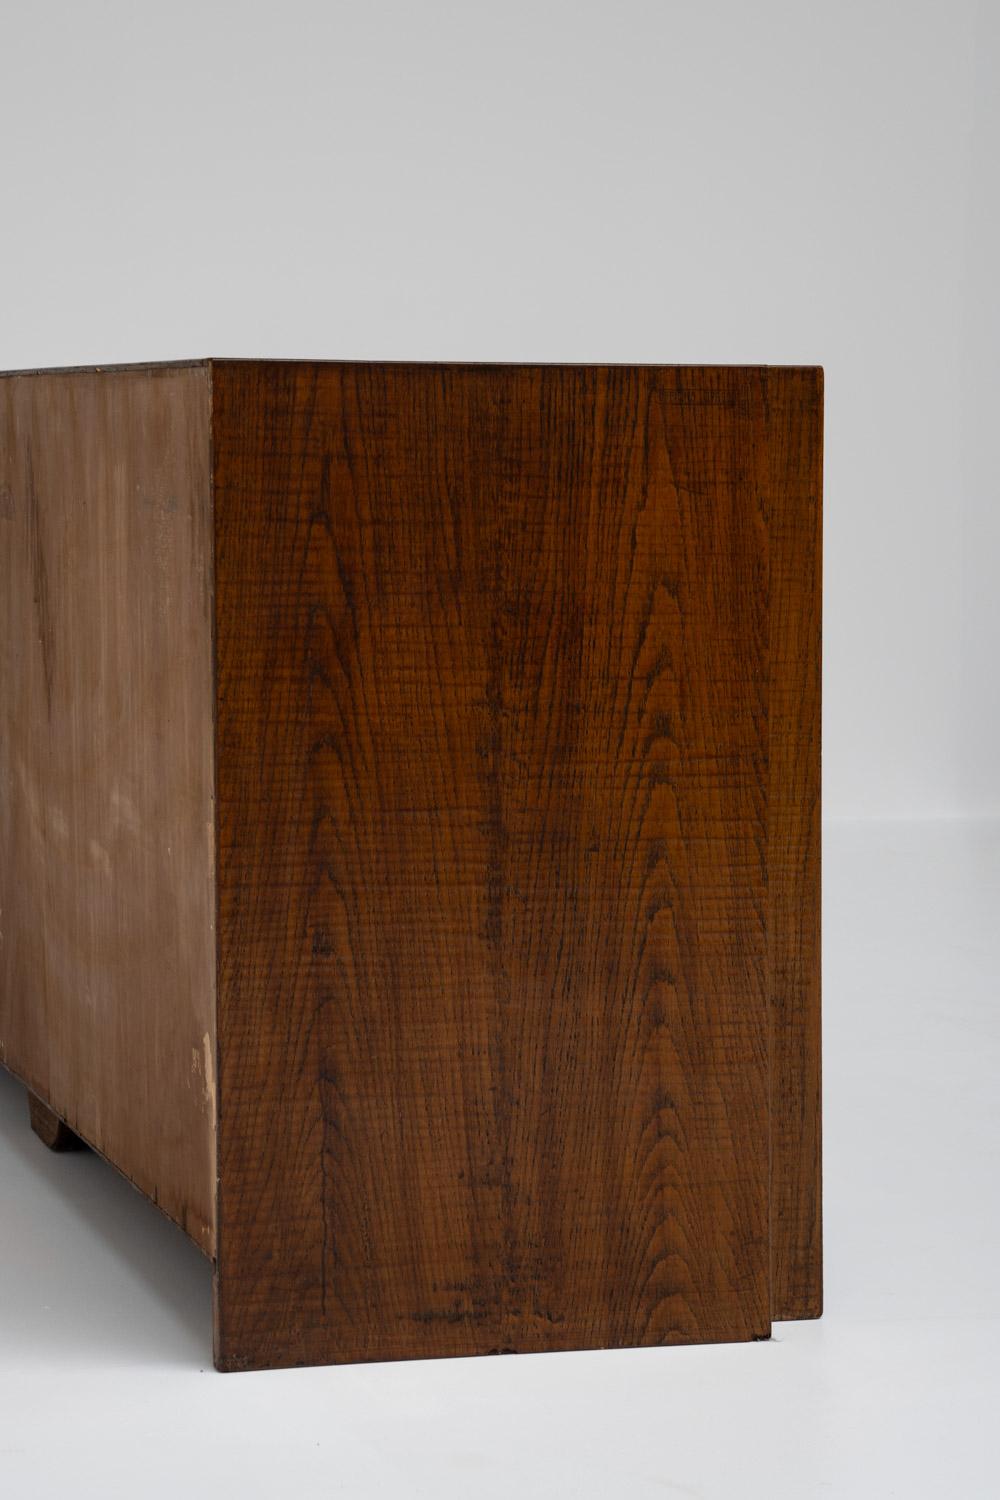 Officina Rivadossi Sideboard in Solid Oak, Italy 1970s For Sale 1